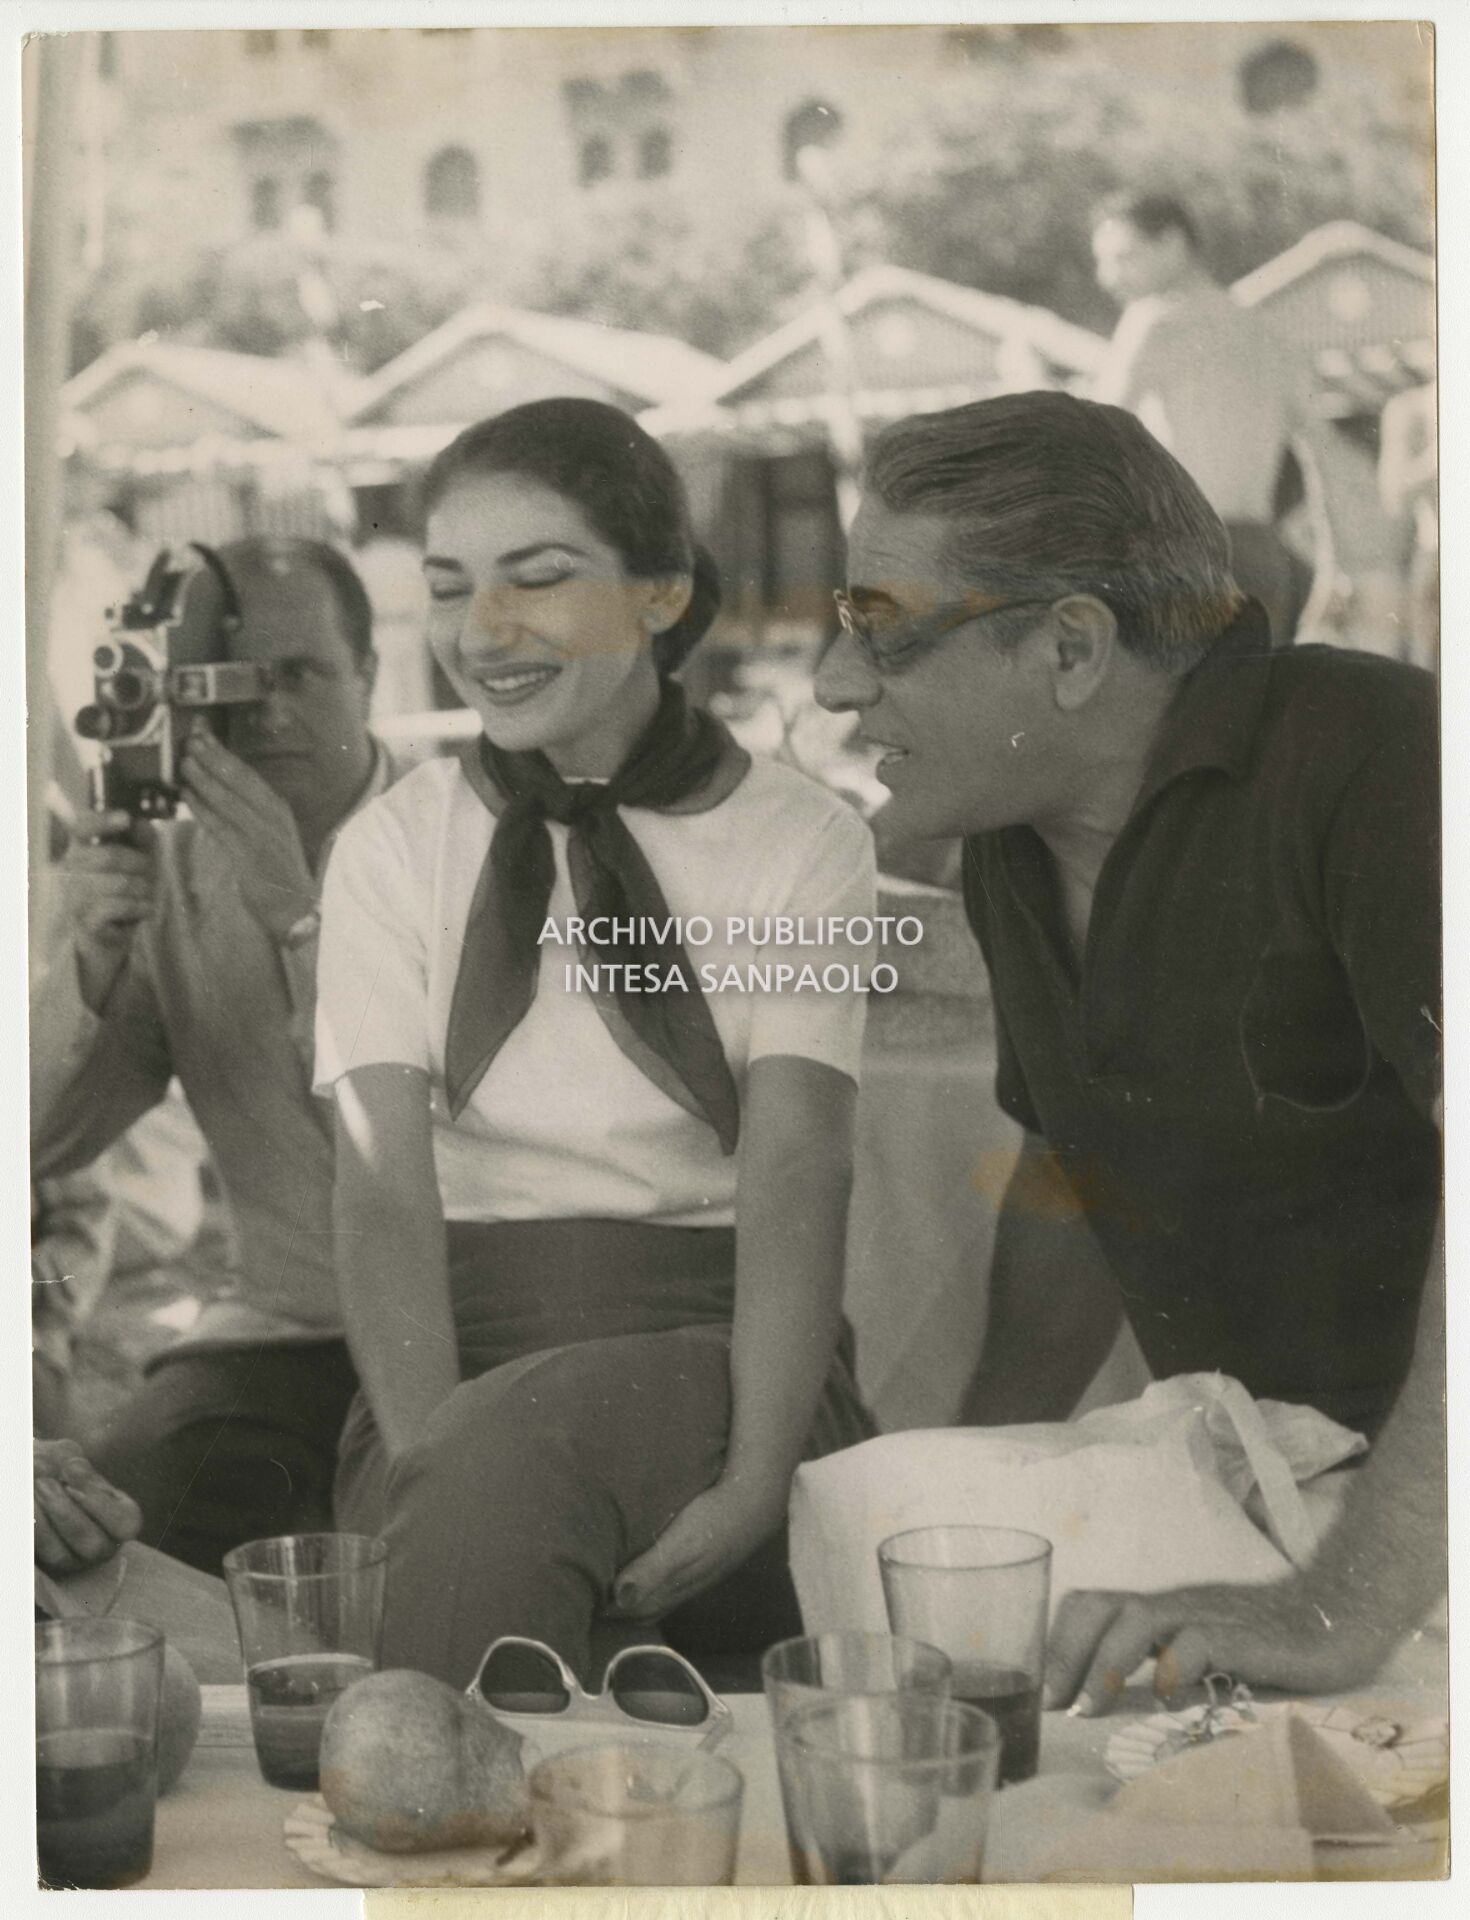 Maria Callas with Aristotele Onassis on the beach at the Excelsior during a reception hosted by Countess Natalia Volpi